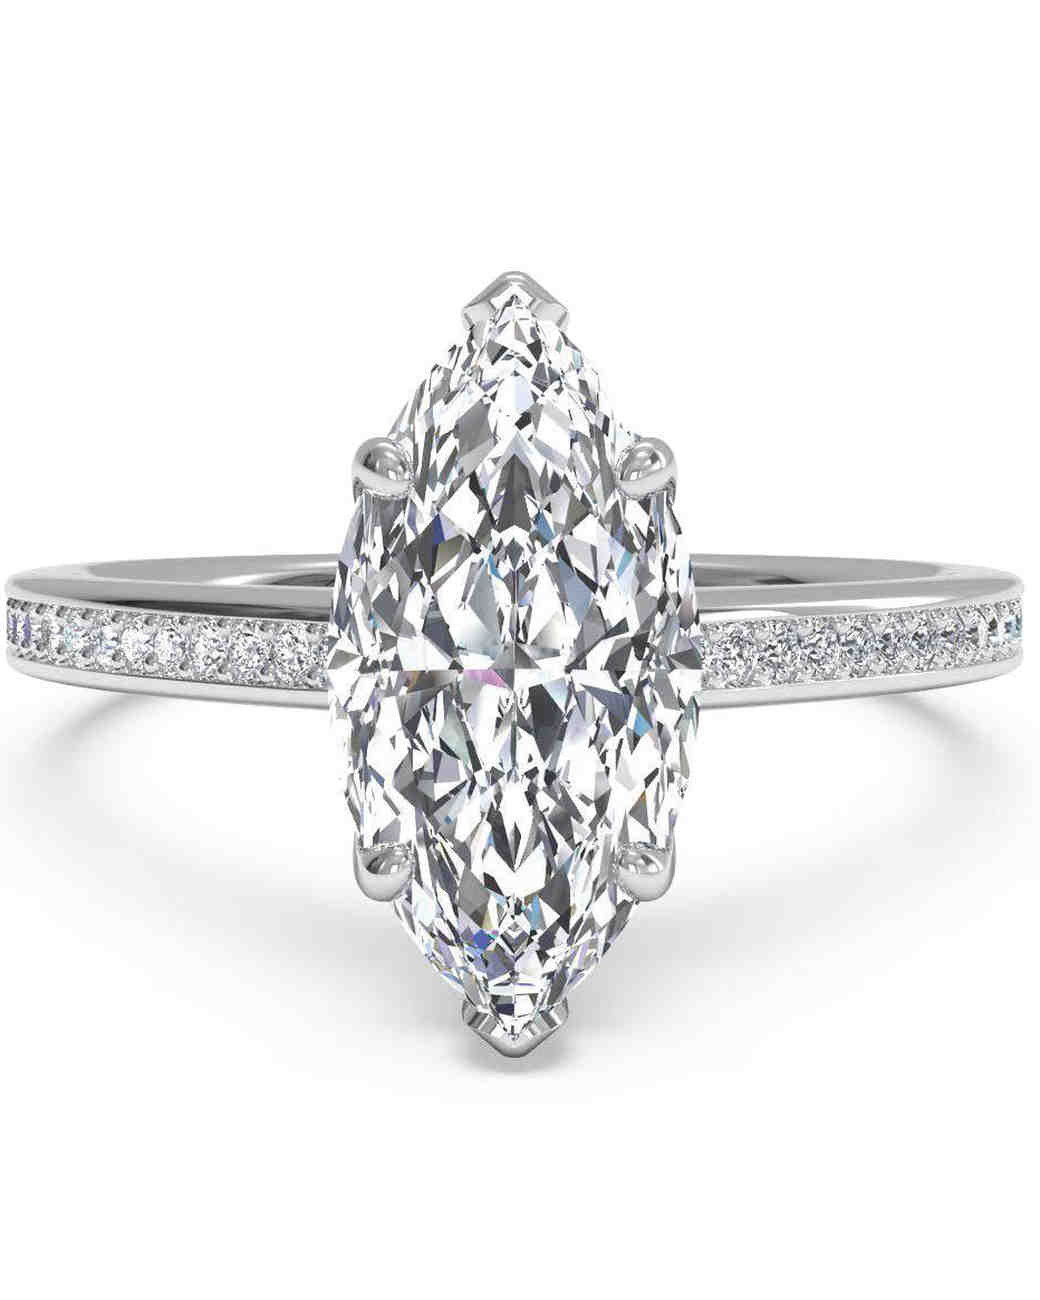 Marquise Cut Diamond Engagement Ring
 Marquise Cut Diamond Engagement Rings